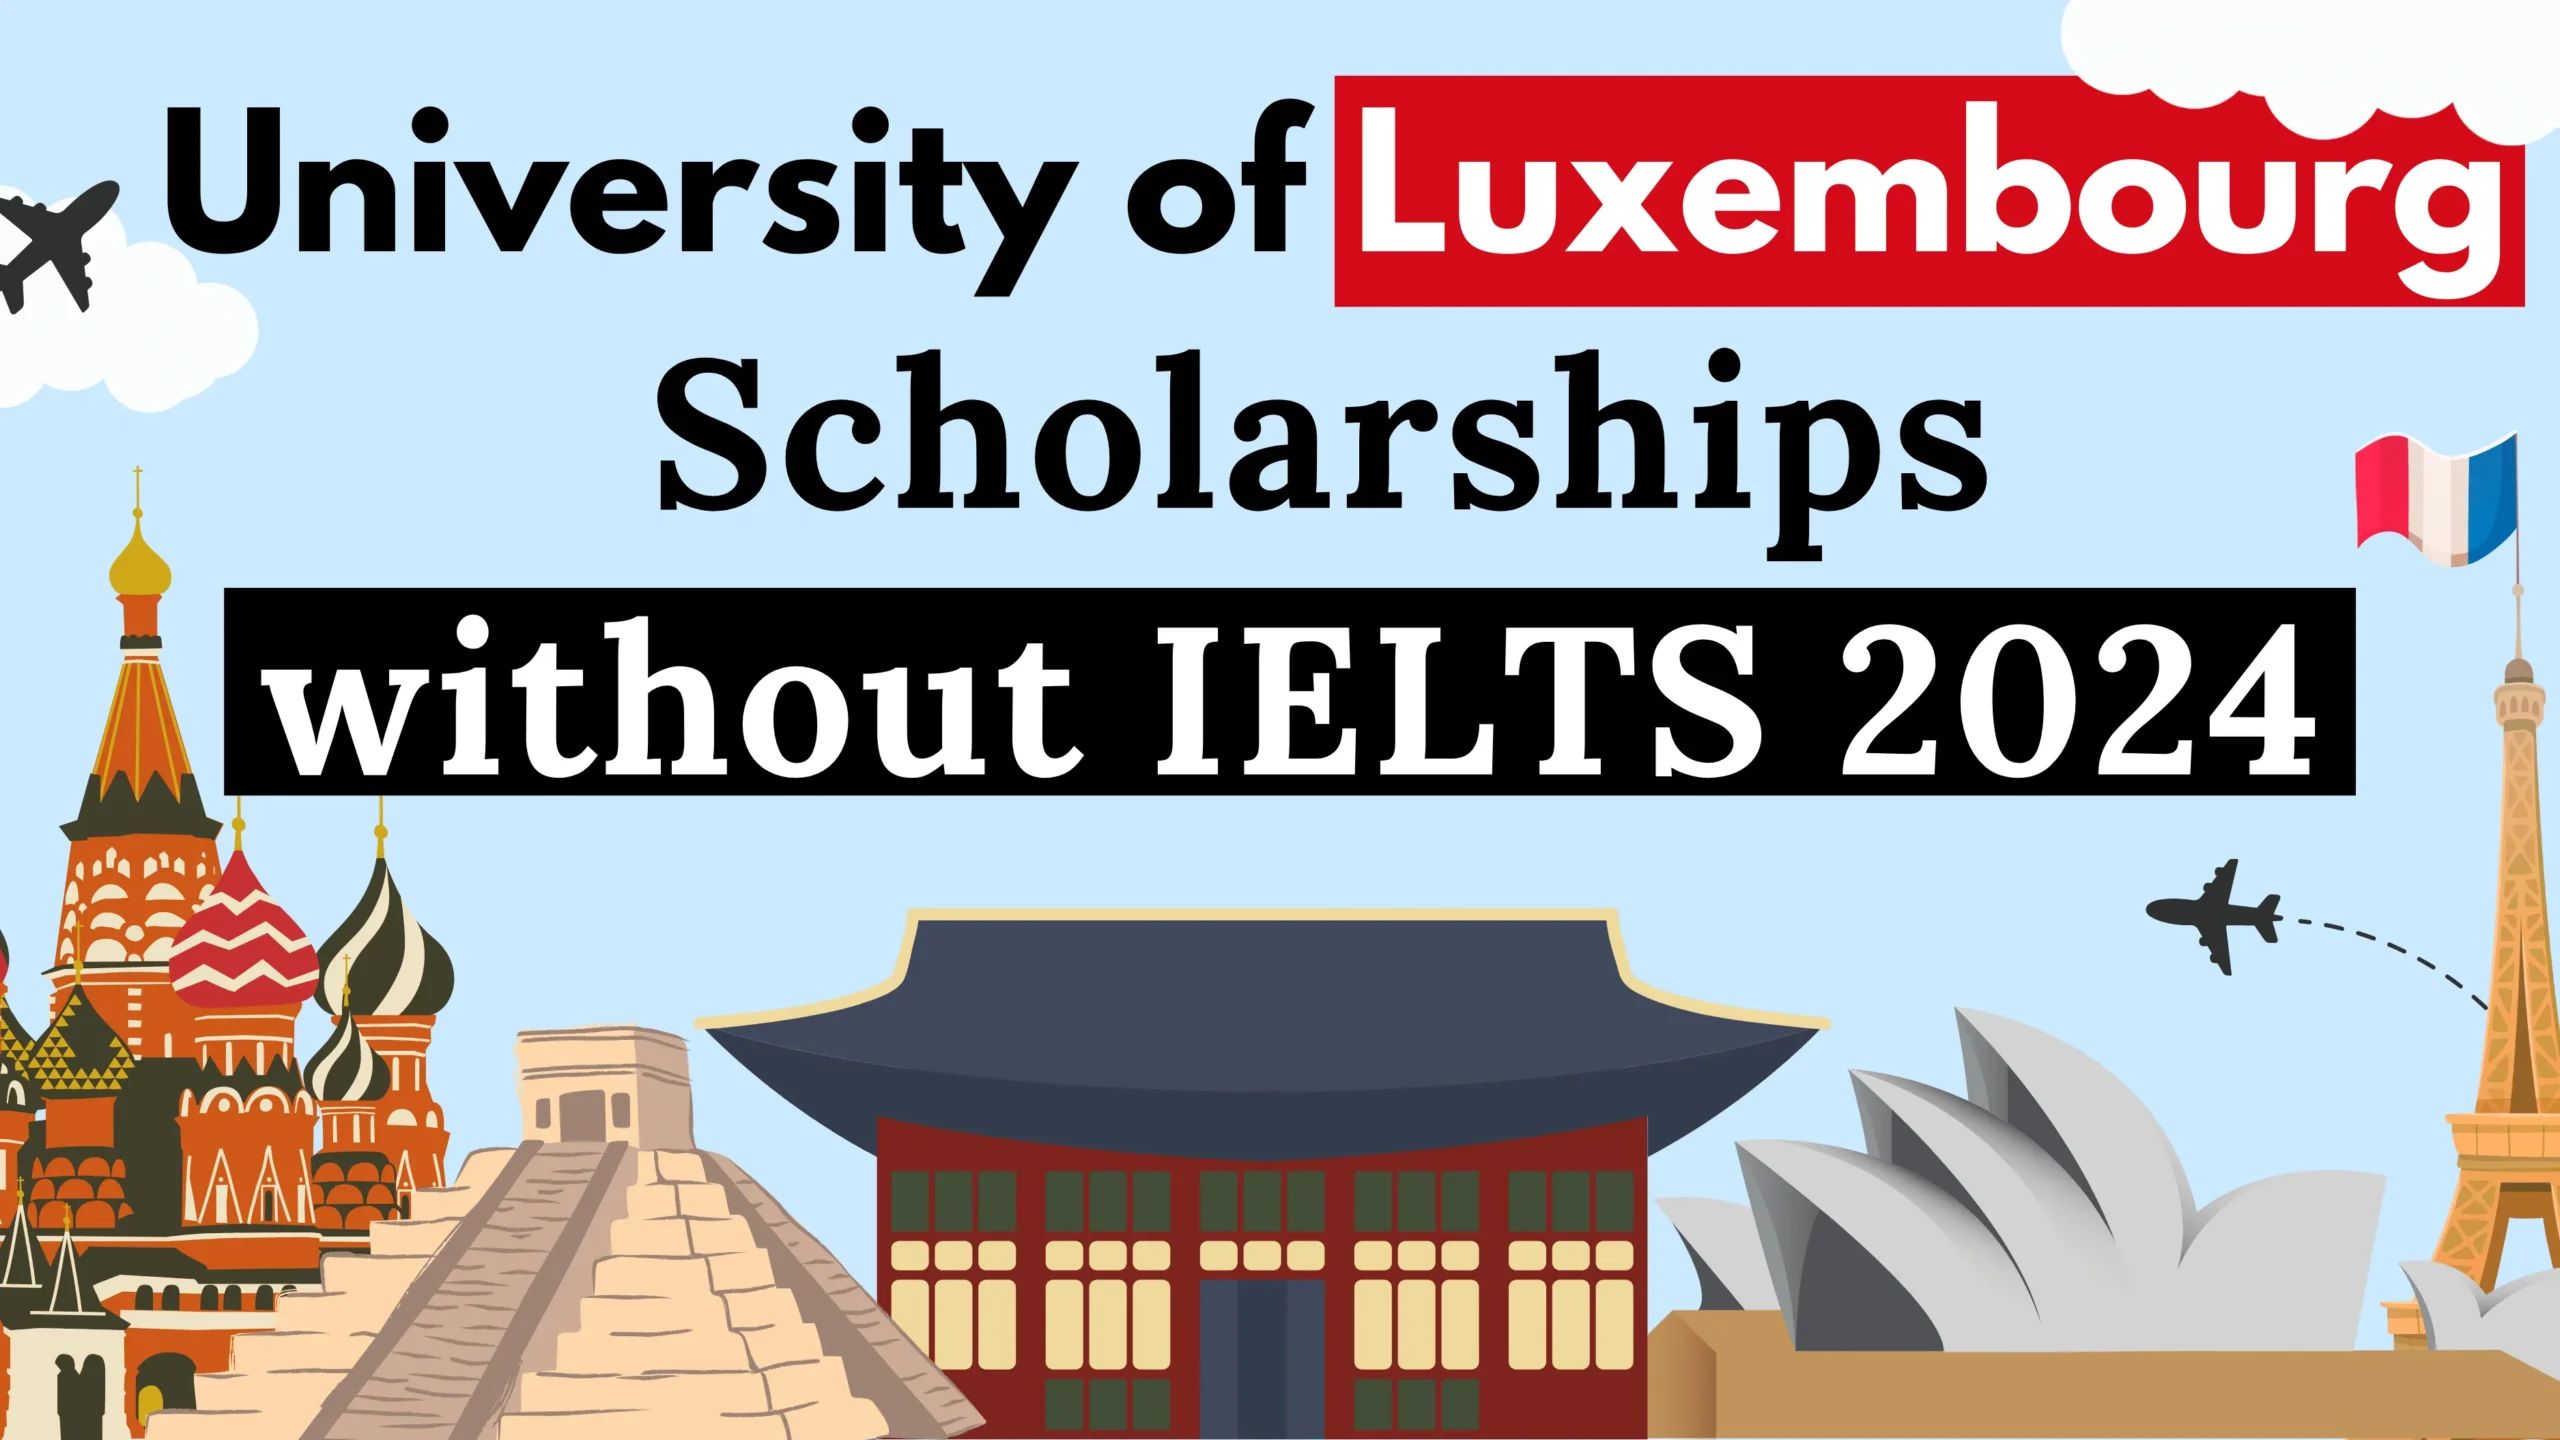 University of Luxembourg Scholarships without IELTS 2024